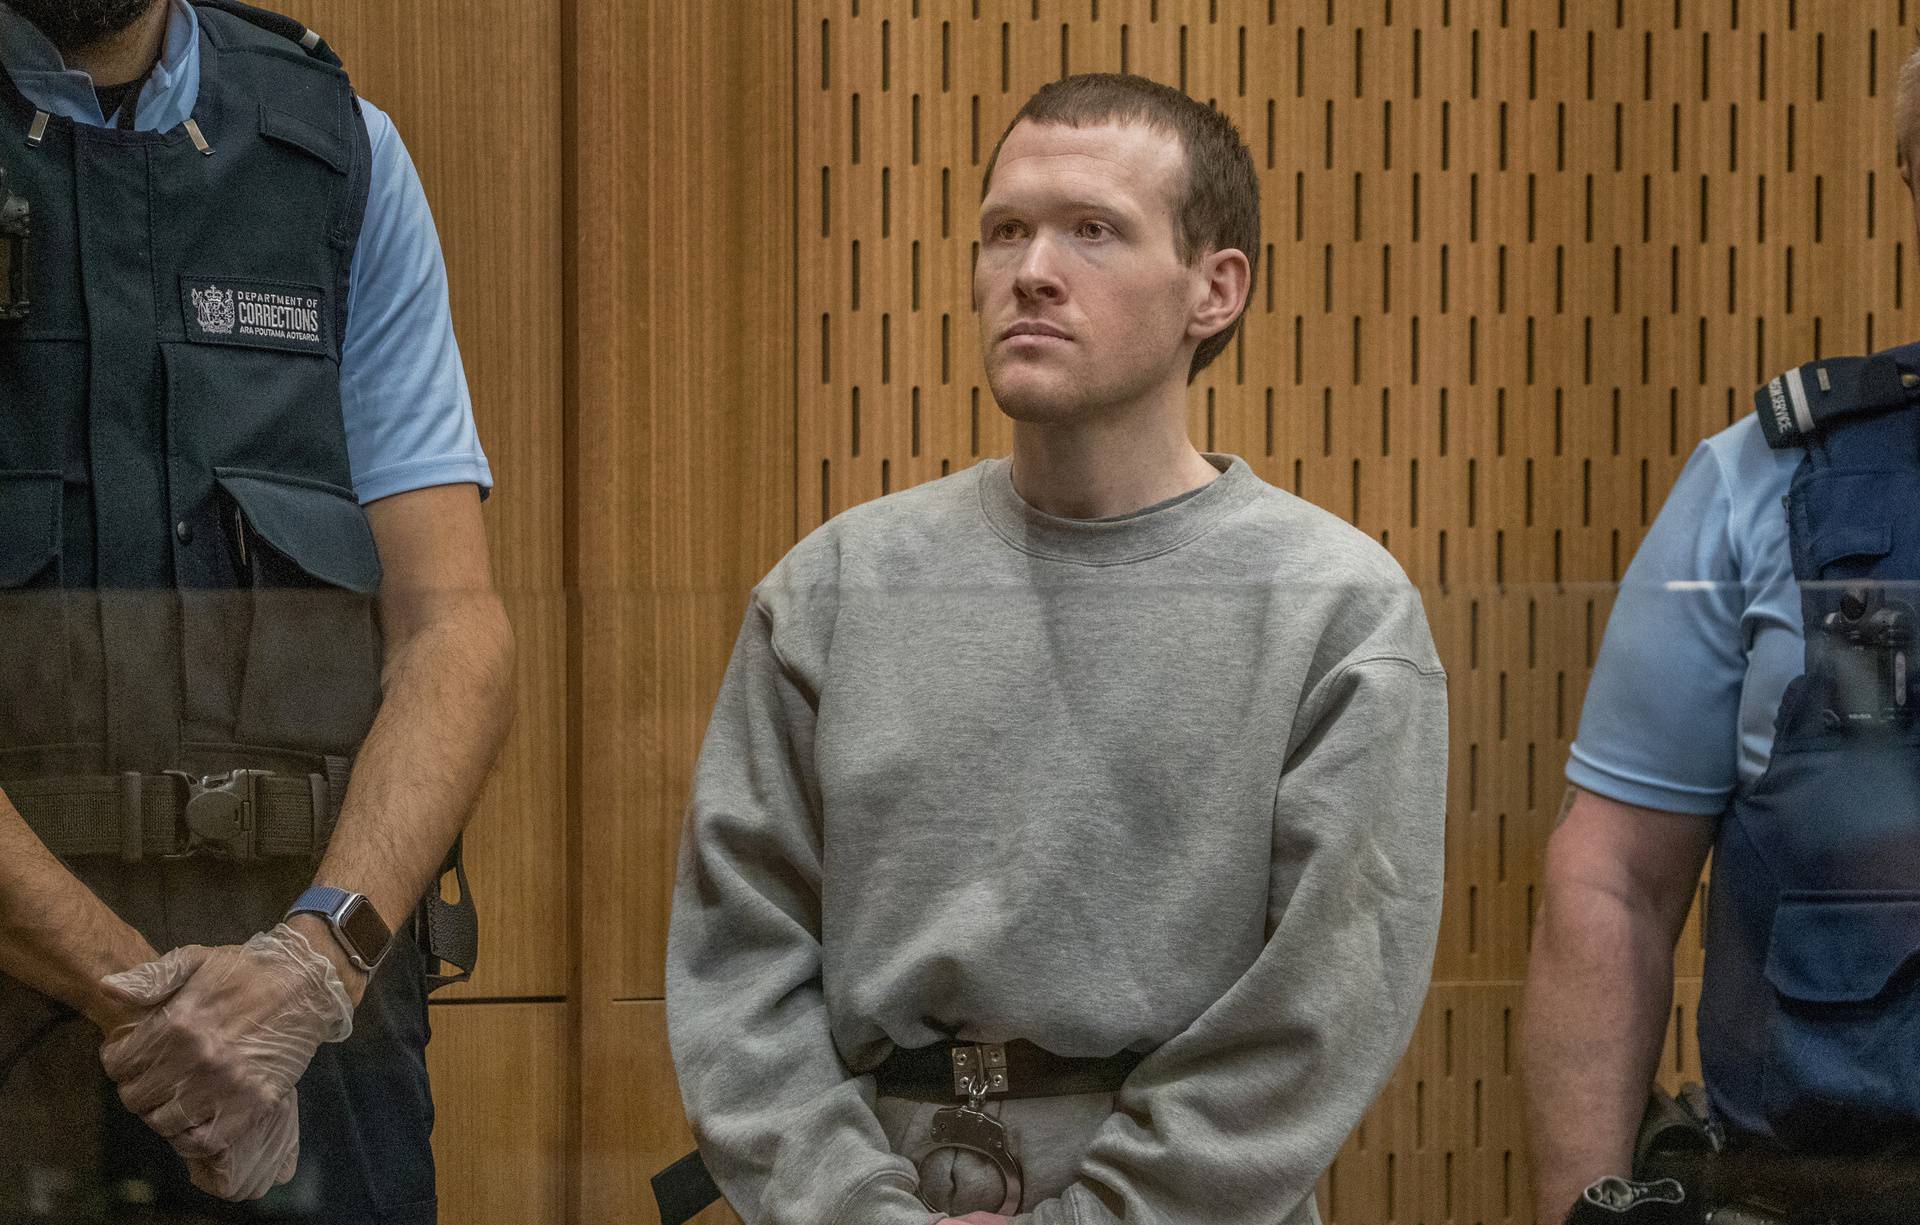 FILE PHOTO - The sentencing for mosque gunman Brenton Tarrant takes place in Christchurch